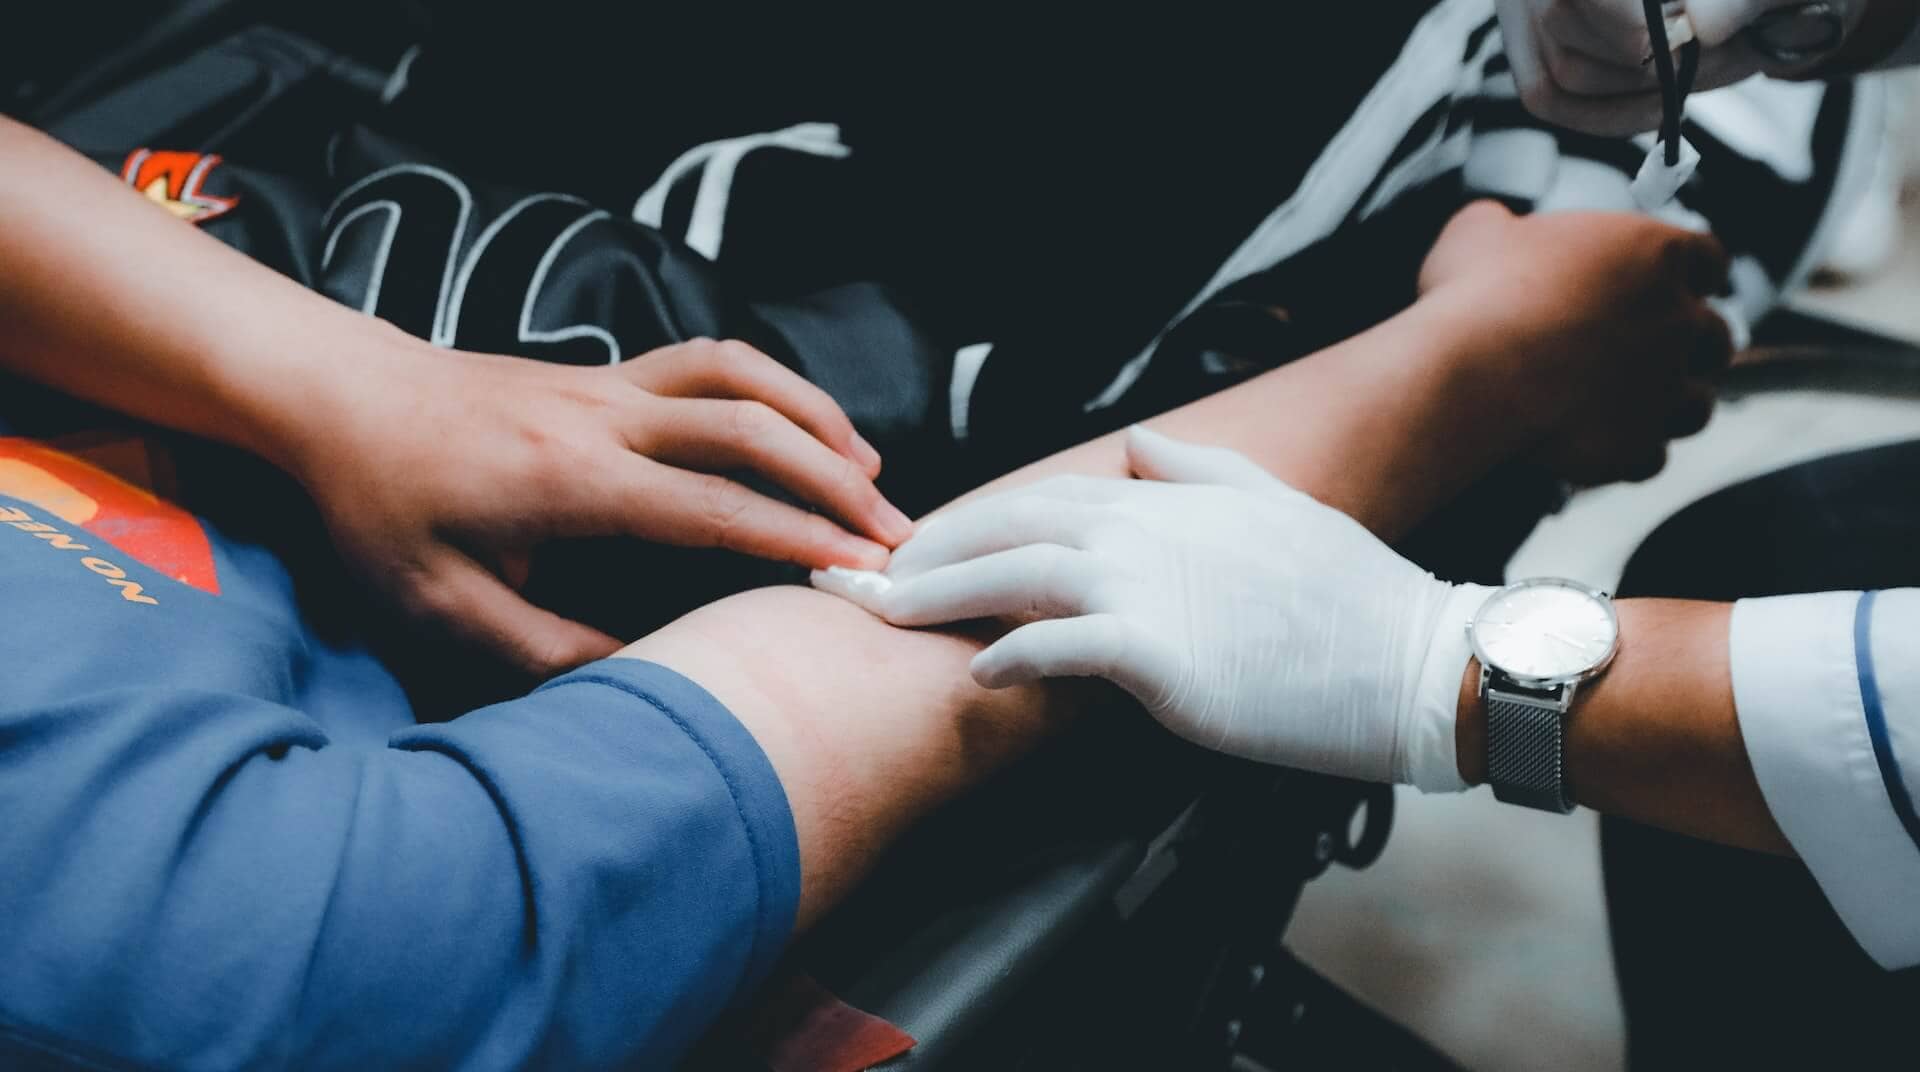 A healthcare professional taking blood from a person